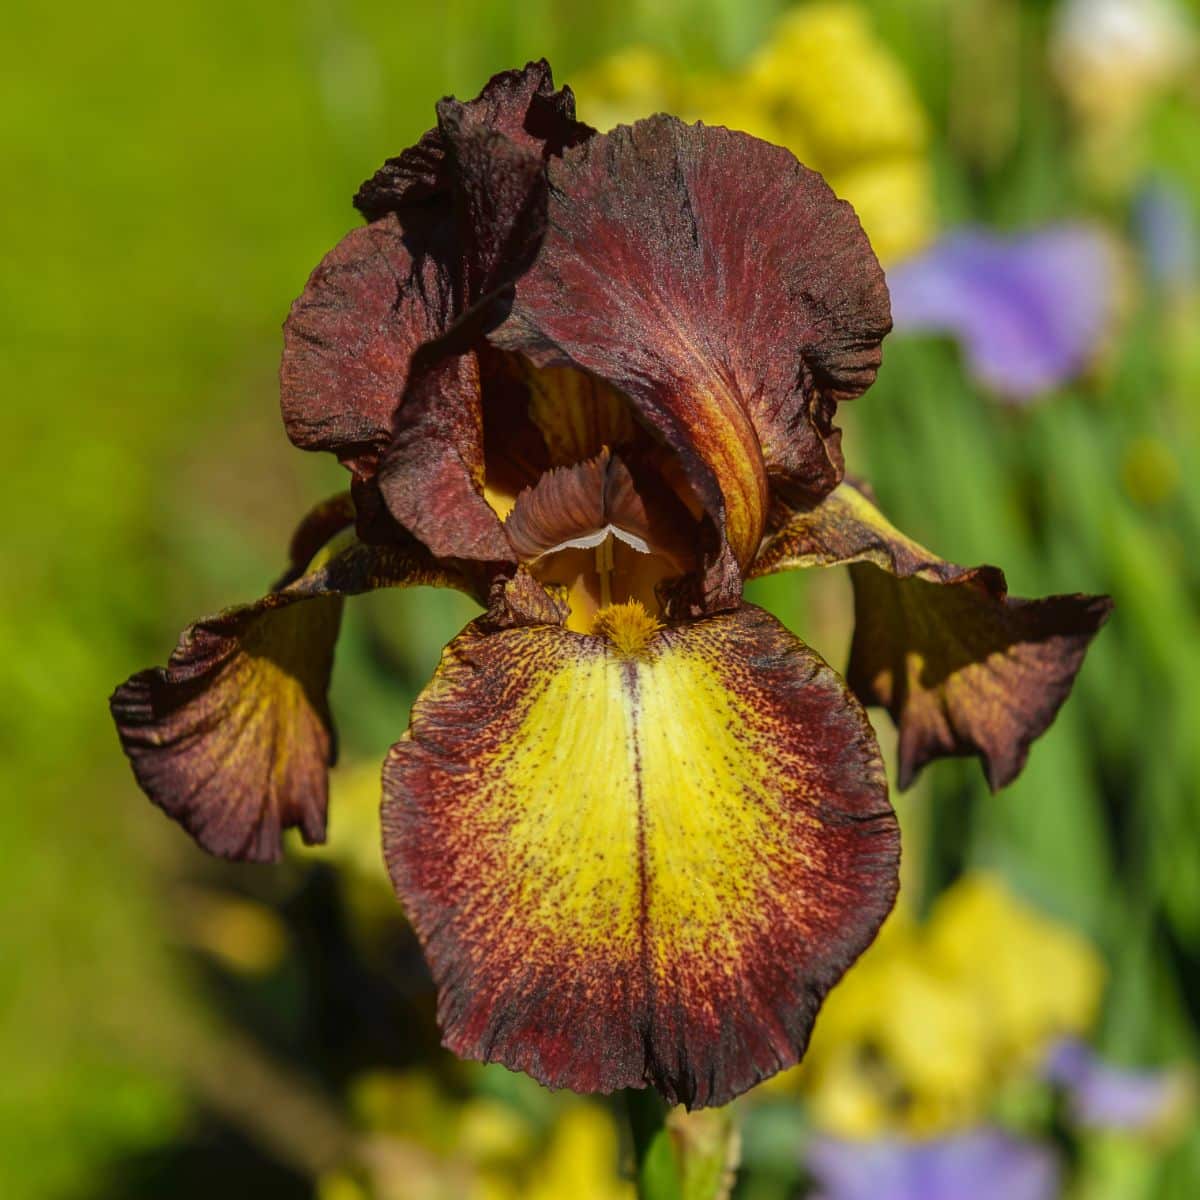 A close-up of a brown, yellow Bearded Iris flower.